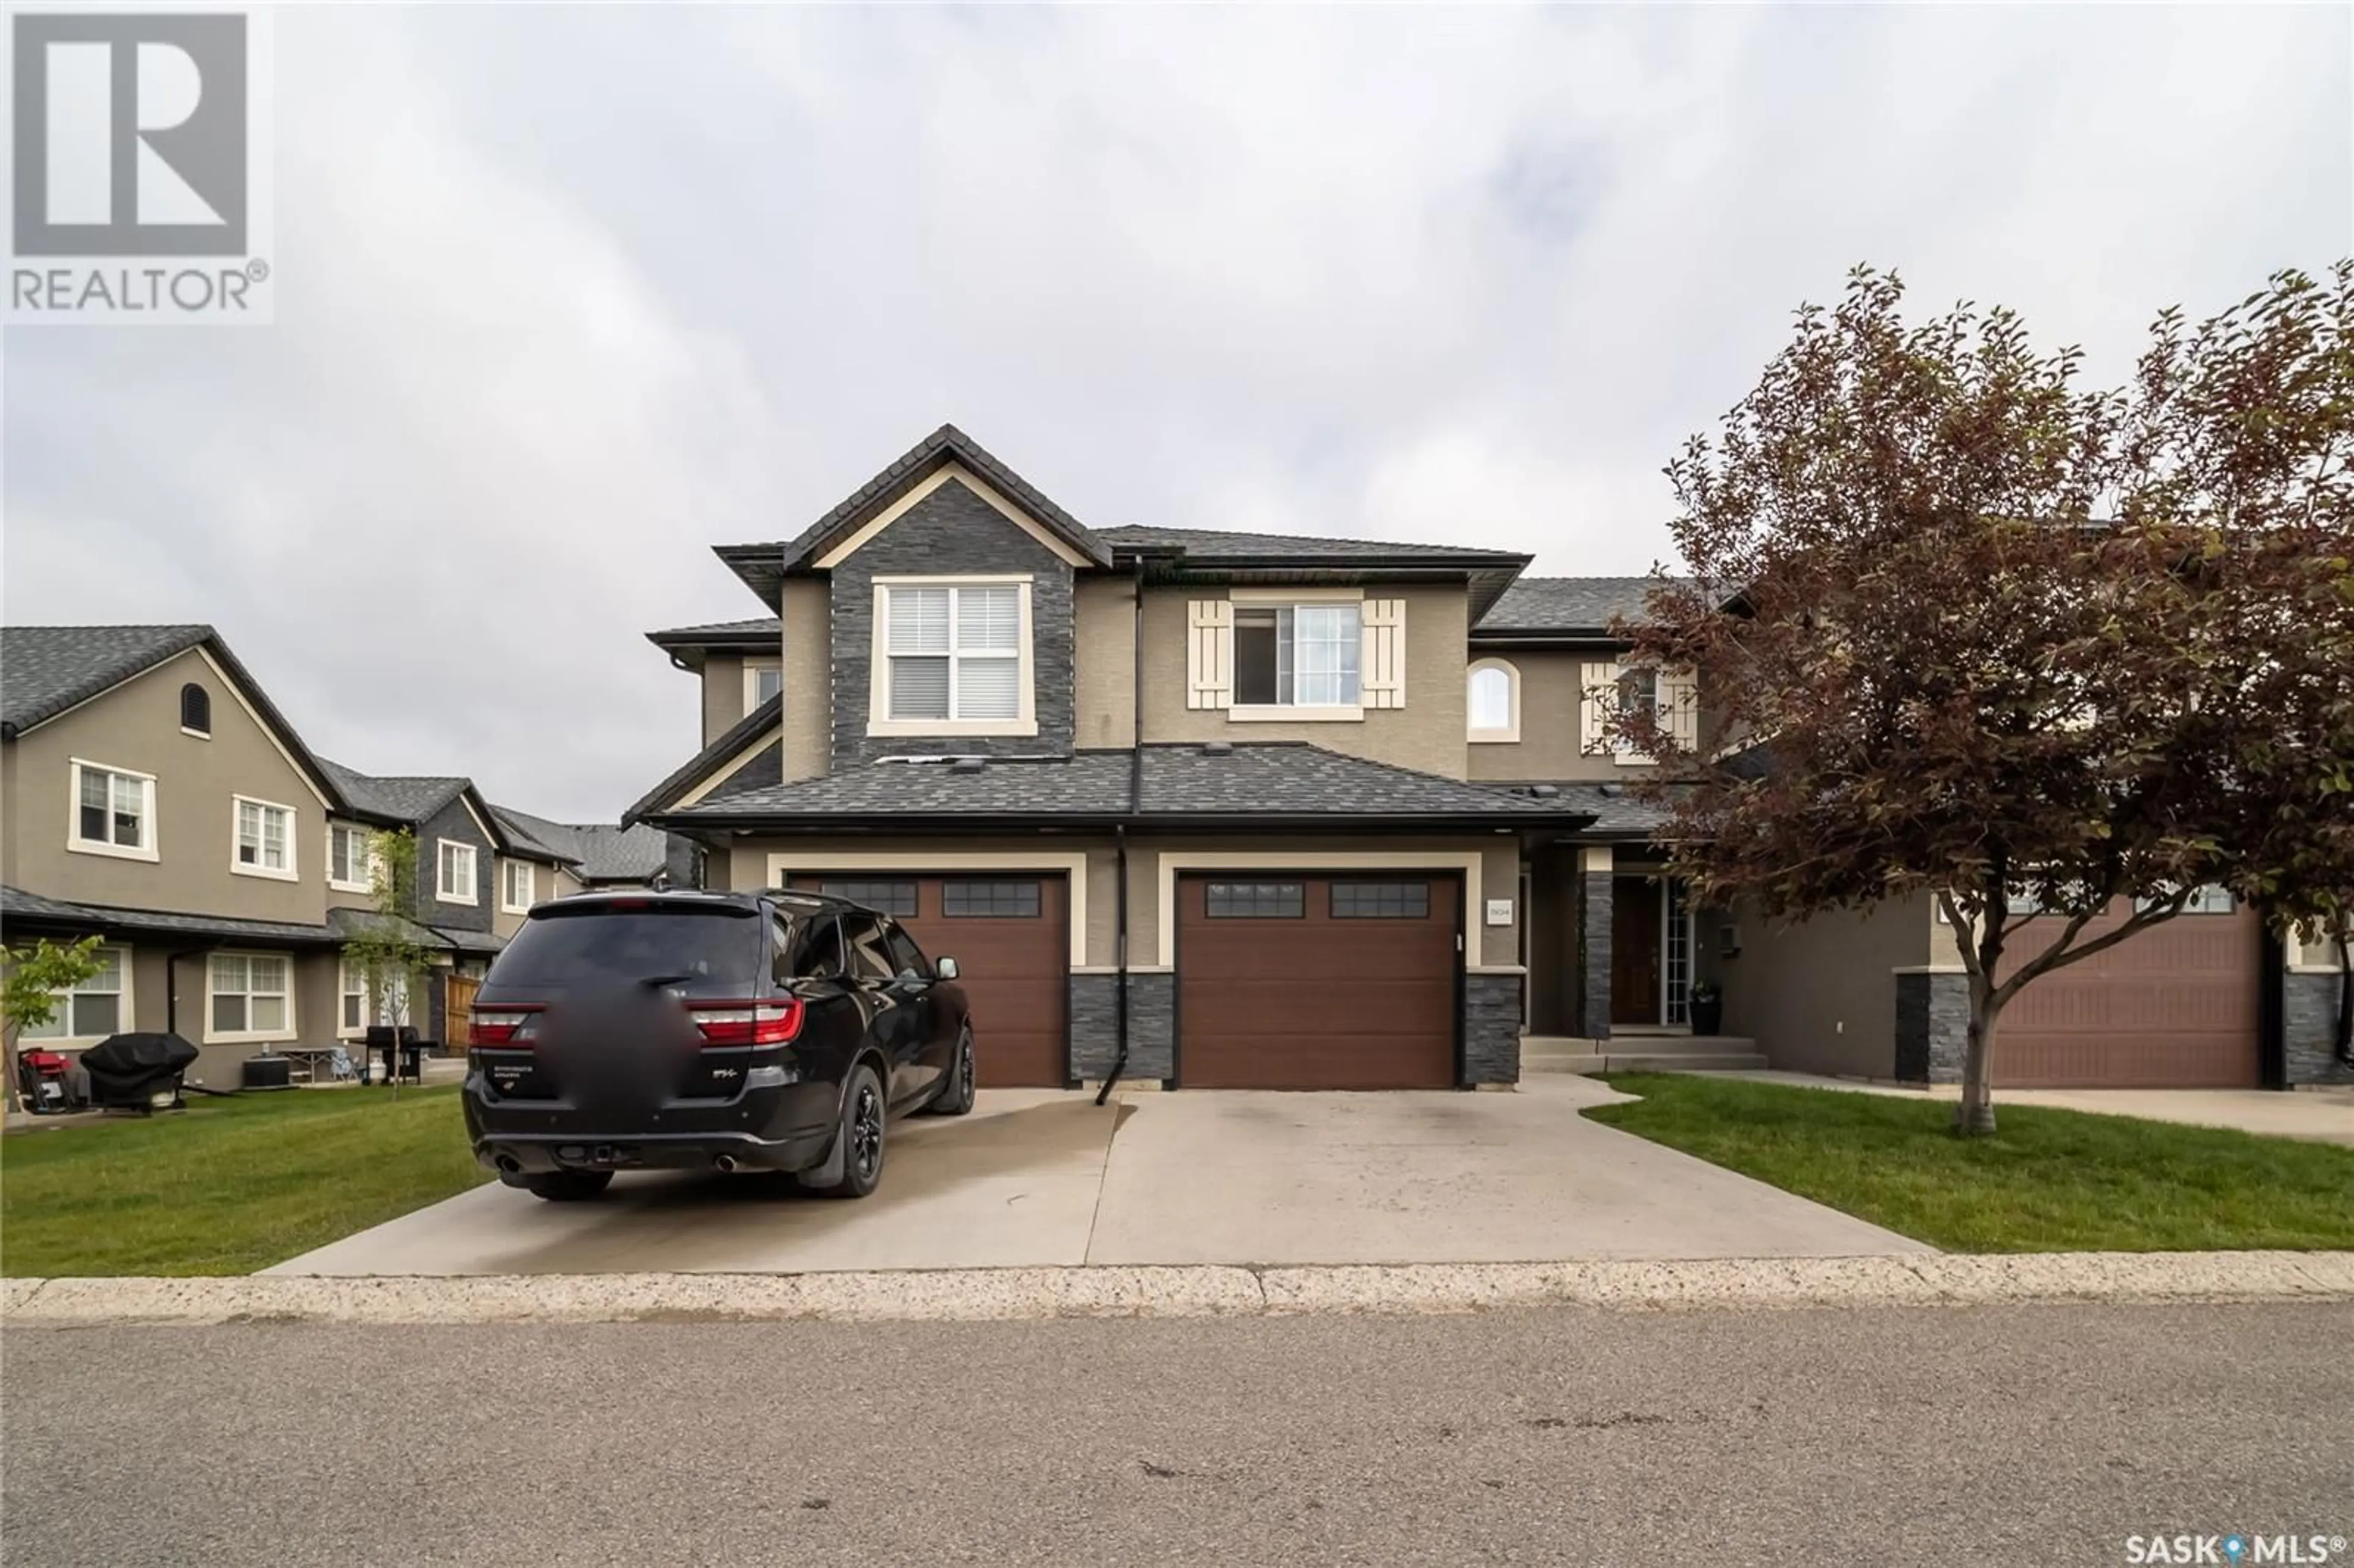 A pic from exterior of the house or condo for 504 455 Rempel LANE, Saskatoon Saskatchewan S7T0R9